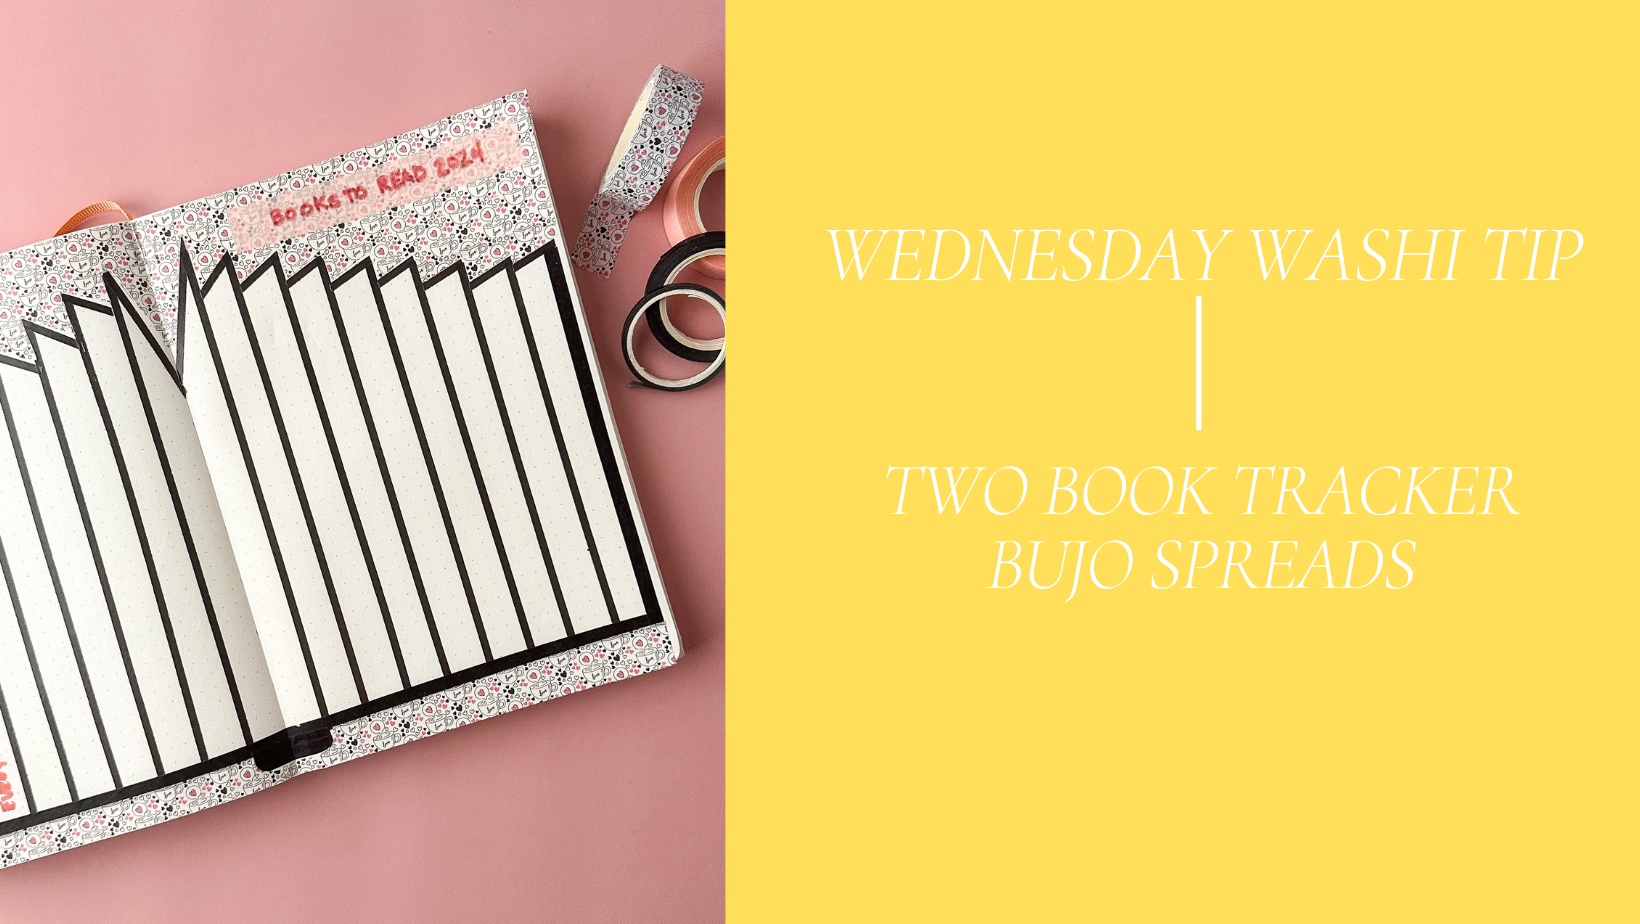 Two Book Tracker Spreads - Wednesday Washi Tip